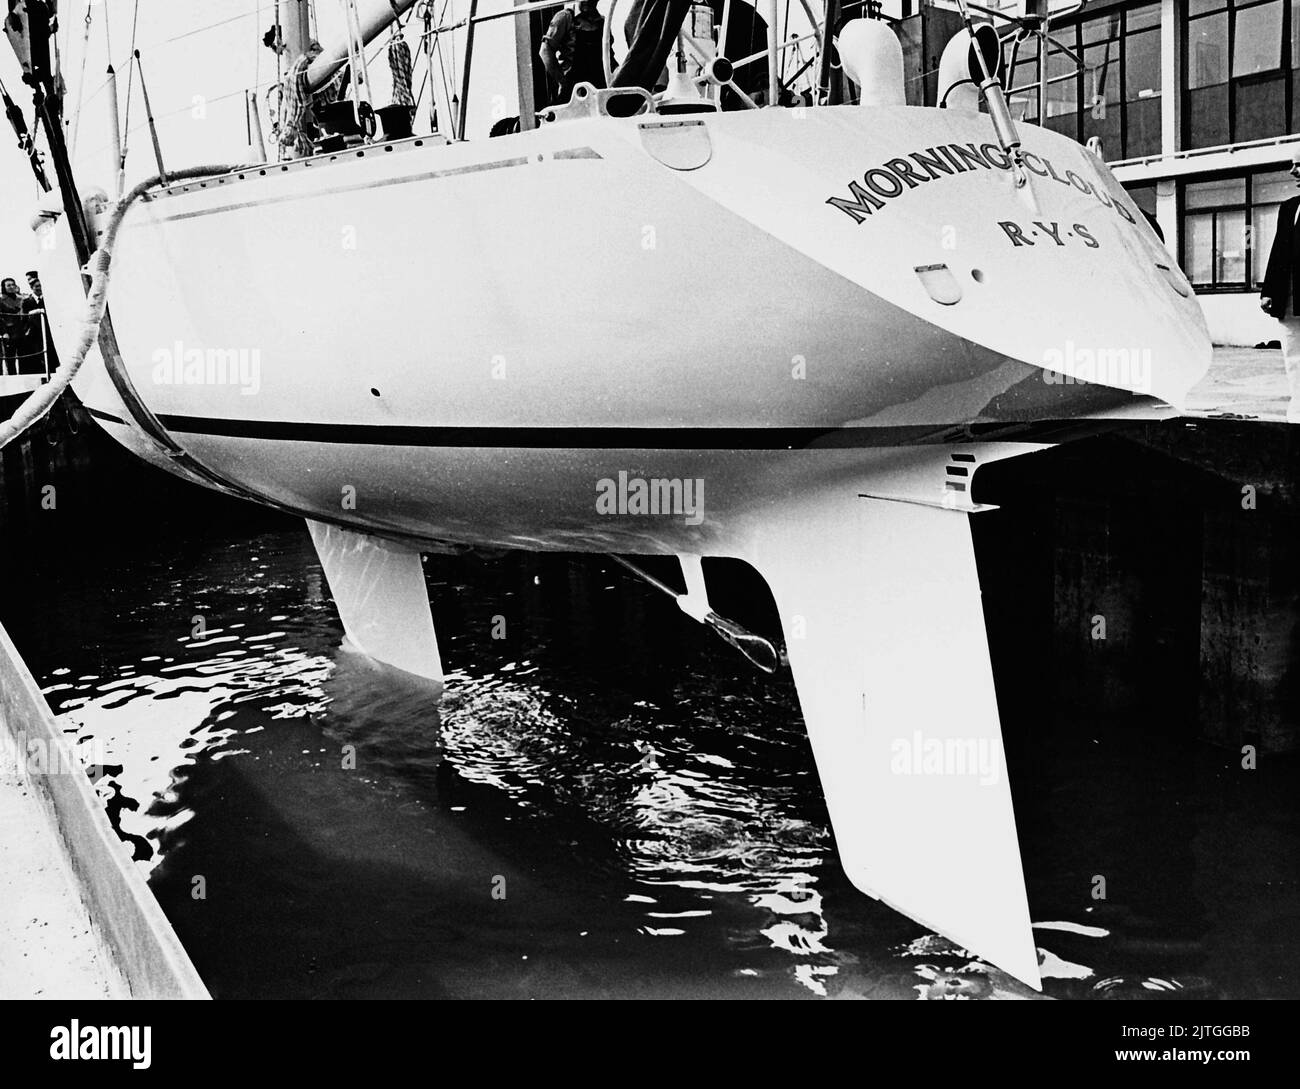 AJAXNETPHOTO. 10TH MAY,1975. GOSPORT, ENGLAND. - FIN AND SKEG - RT.HON. EDWARD HEATH M.P'S. NEW OCEAN RACING YACHT MORNING CLOUD IV, DESIGNED BY ROD STEPHENS OF SPARKMAN & STEPHENS, BEING LOWERED INTO THE WATER AFTER ITS OFFICIAL NAMING BY MRS MARY HEATH AT CAMPER & NICHOLSON YACHT YARD. PHOTO:JONATHAN EASTLAND/AJAX REF:340 220105 16 Stock Photo